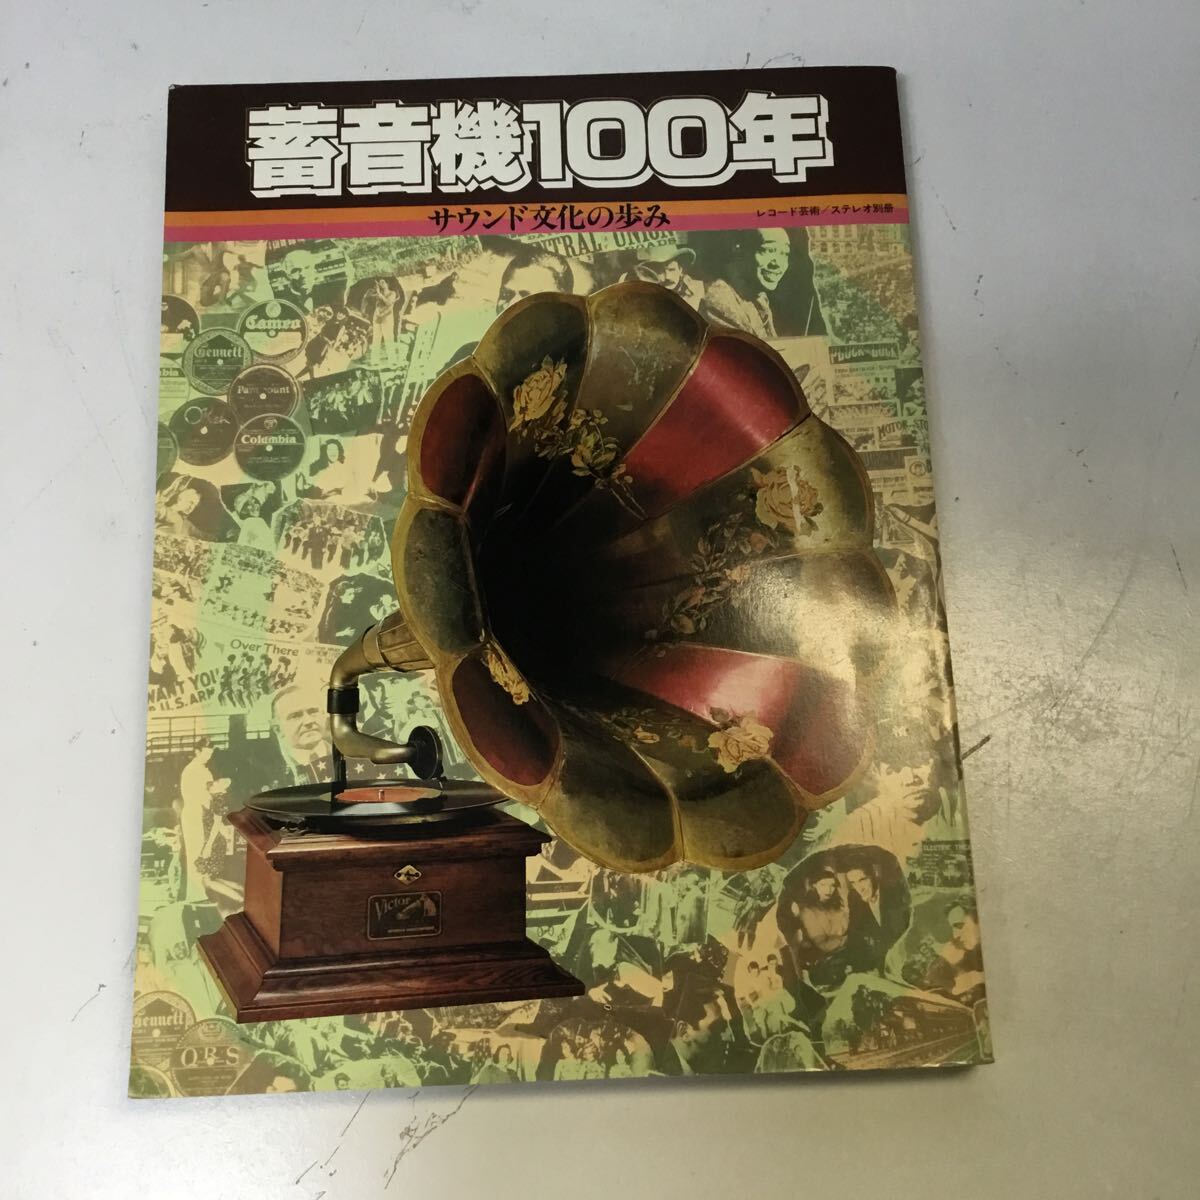  gramophone 100 year sound culture. .. history paper publication old book secondhand book materials book@ record music Showa Retro antique TS3W